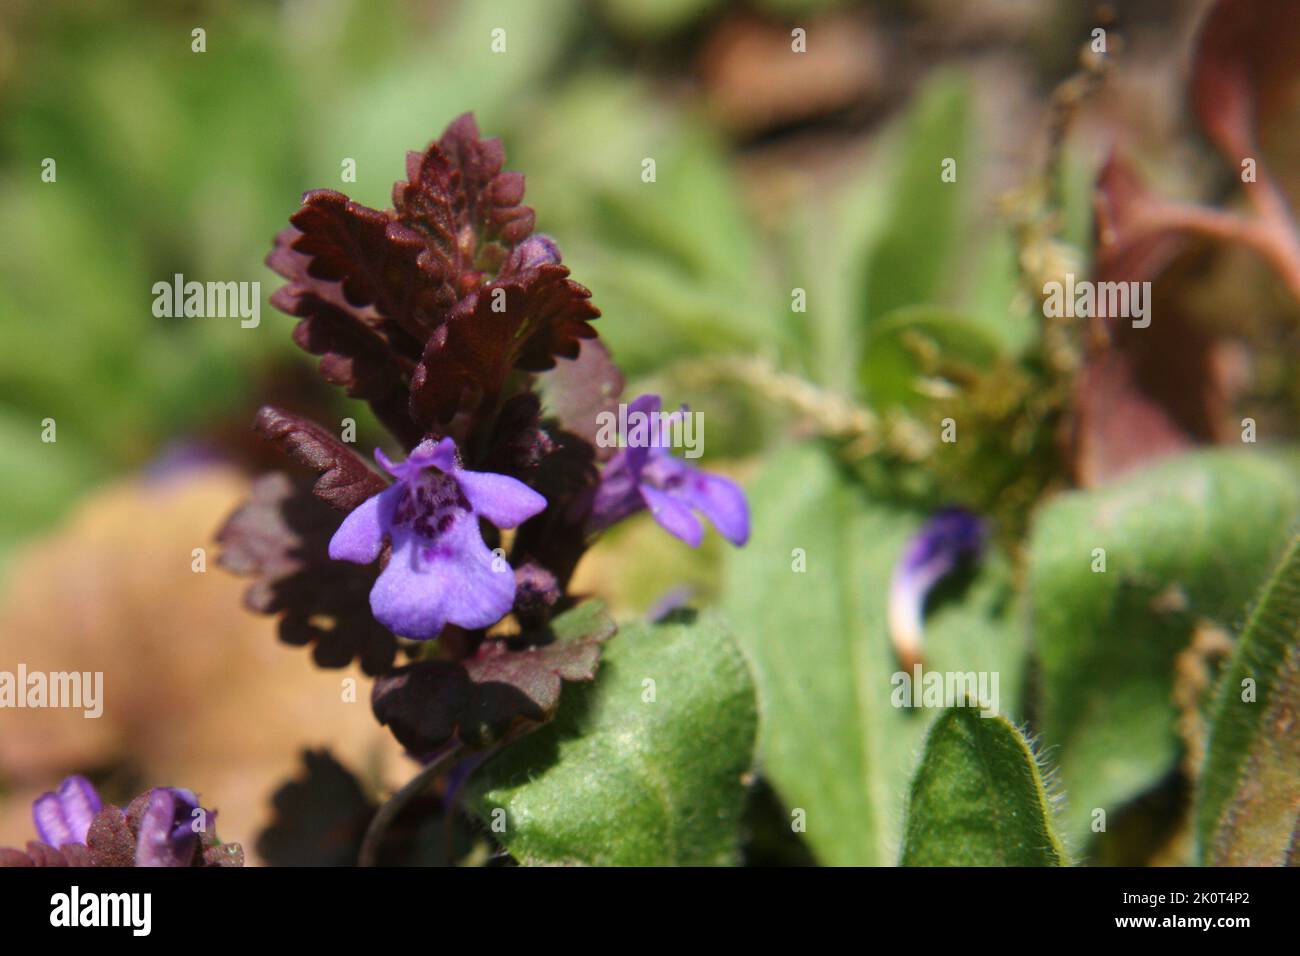 Ground-ivy or gill-over-the-ground or creeping charlie or alehoof or tunhoof or catsfoot or field balm or run-away-robin or creeping jenny (Glechoma h Stock Photo